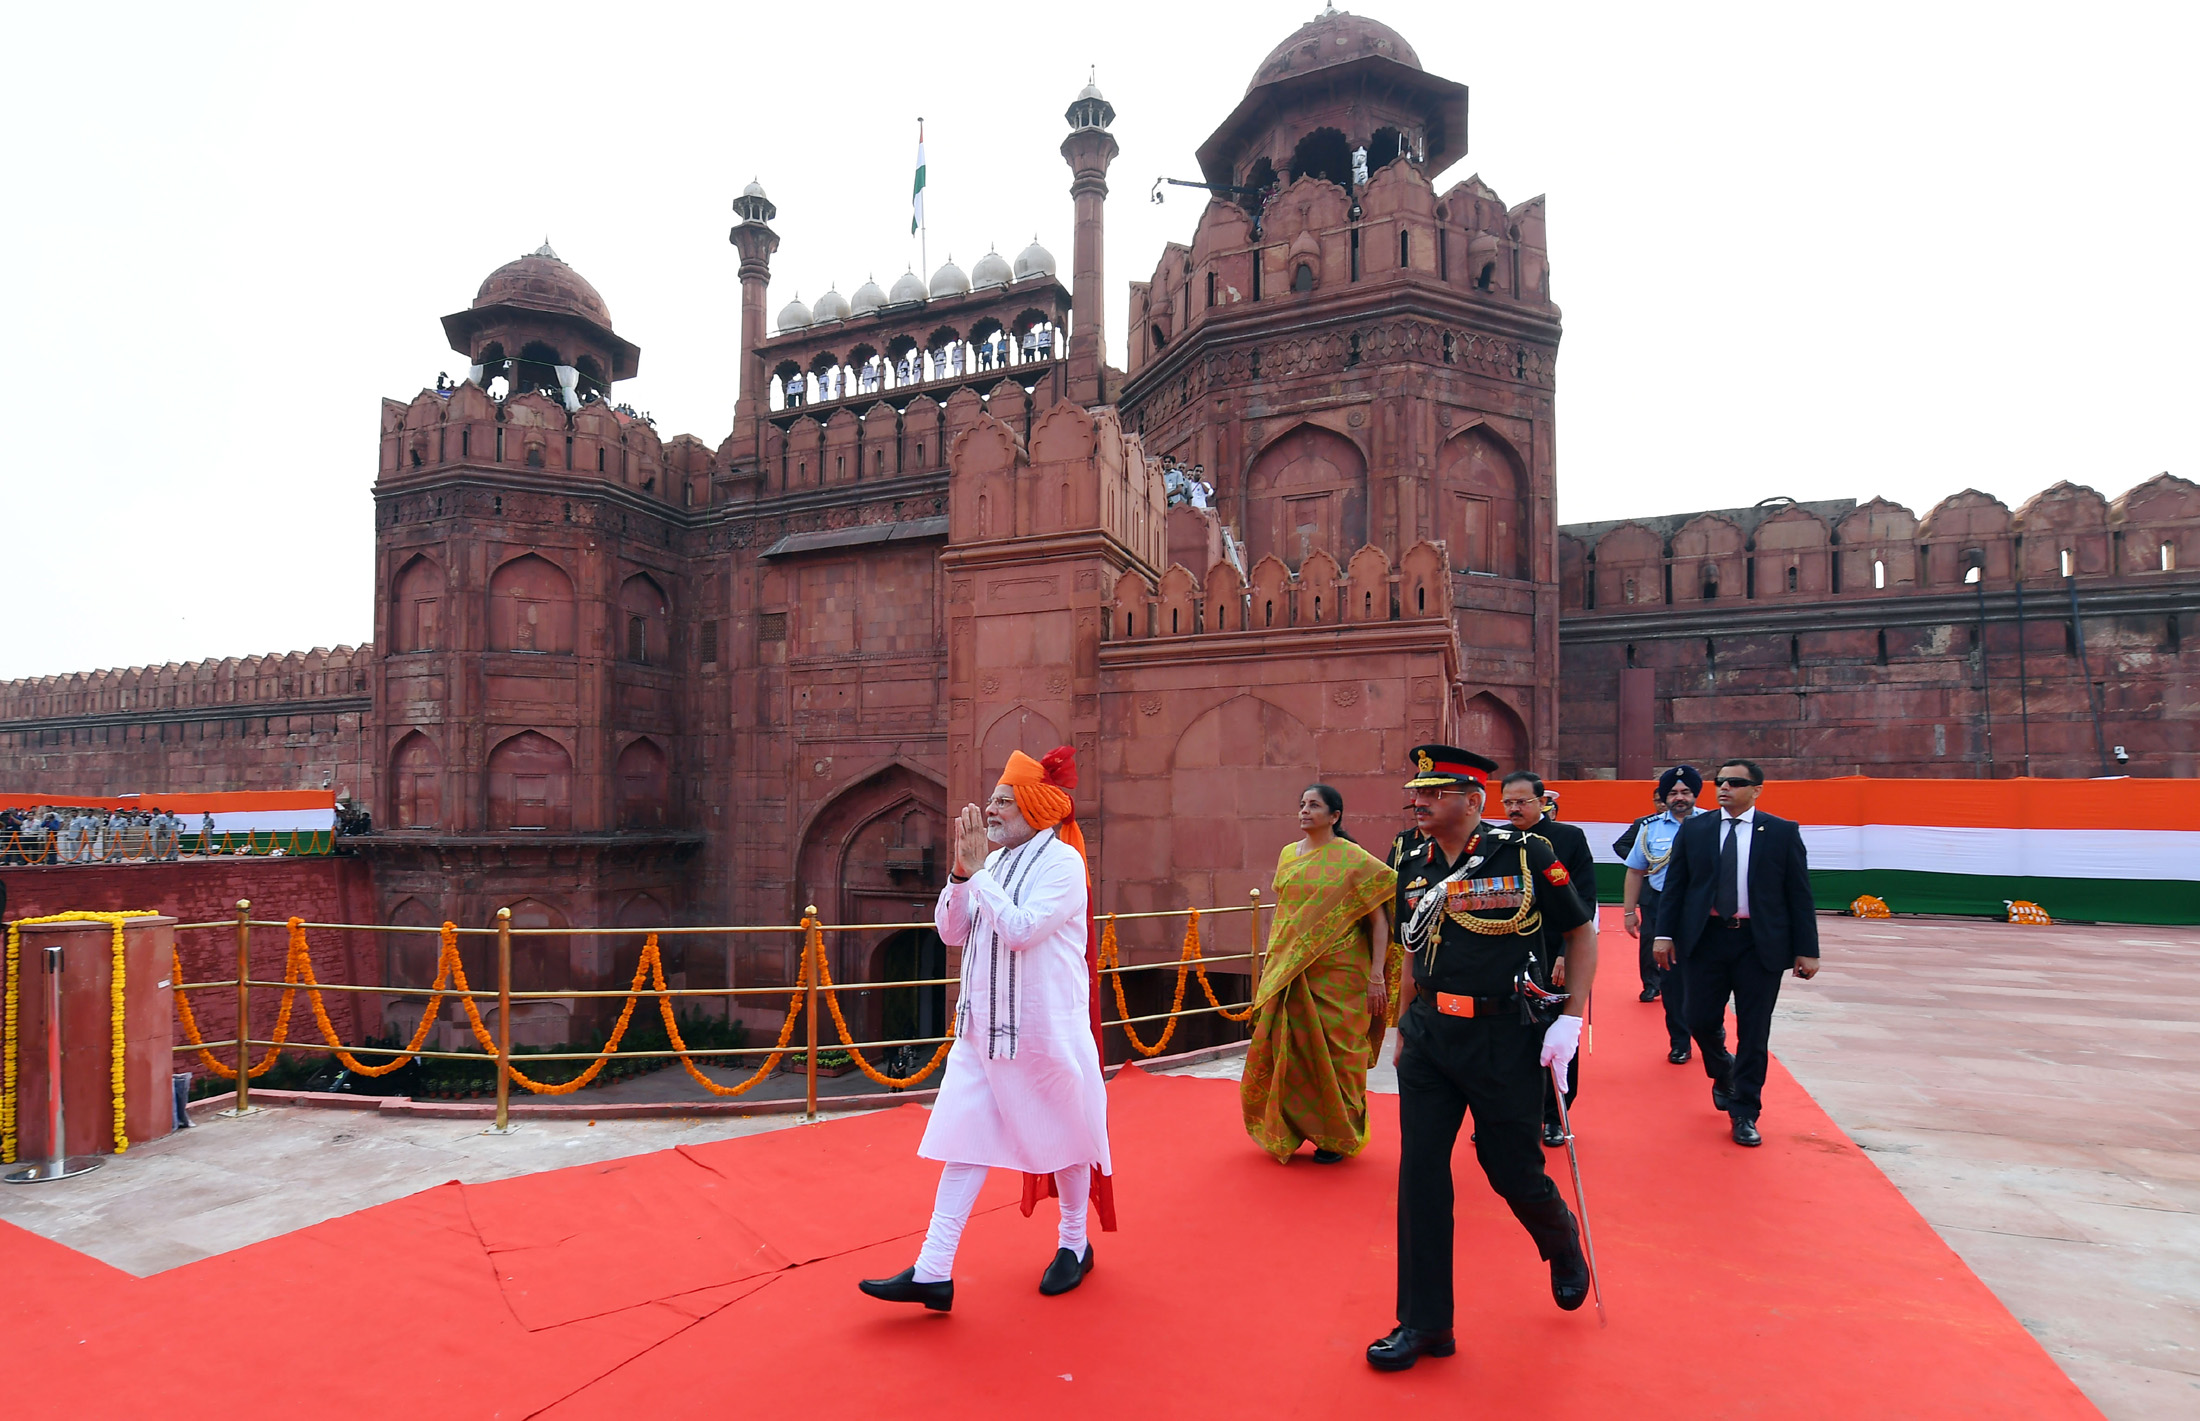 The Prime Minister, Shri Narendra Modi walking towards the dais to address the Nation at the Red Fort, on the occasion of 72nd Independence Day, in Delhi on August 15, 2018. The Union Minister for Defence, Smt. Nirmala Sitharaman and the Minister of State for Defence, Dr. Subhash Ramrao Bhamre are also seen.